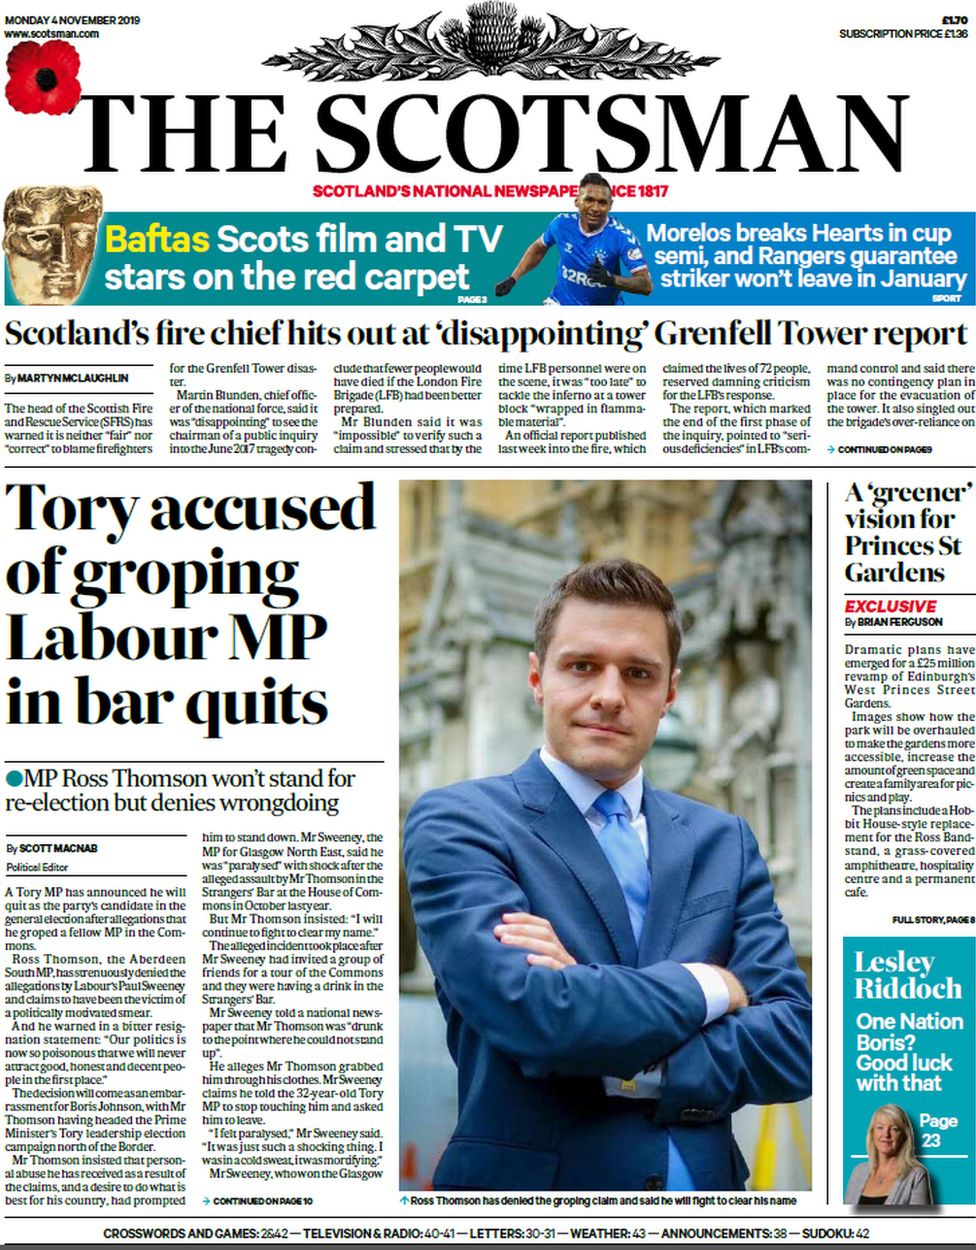 The Scotsman front page